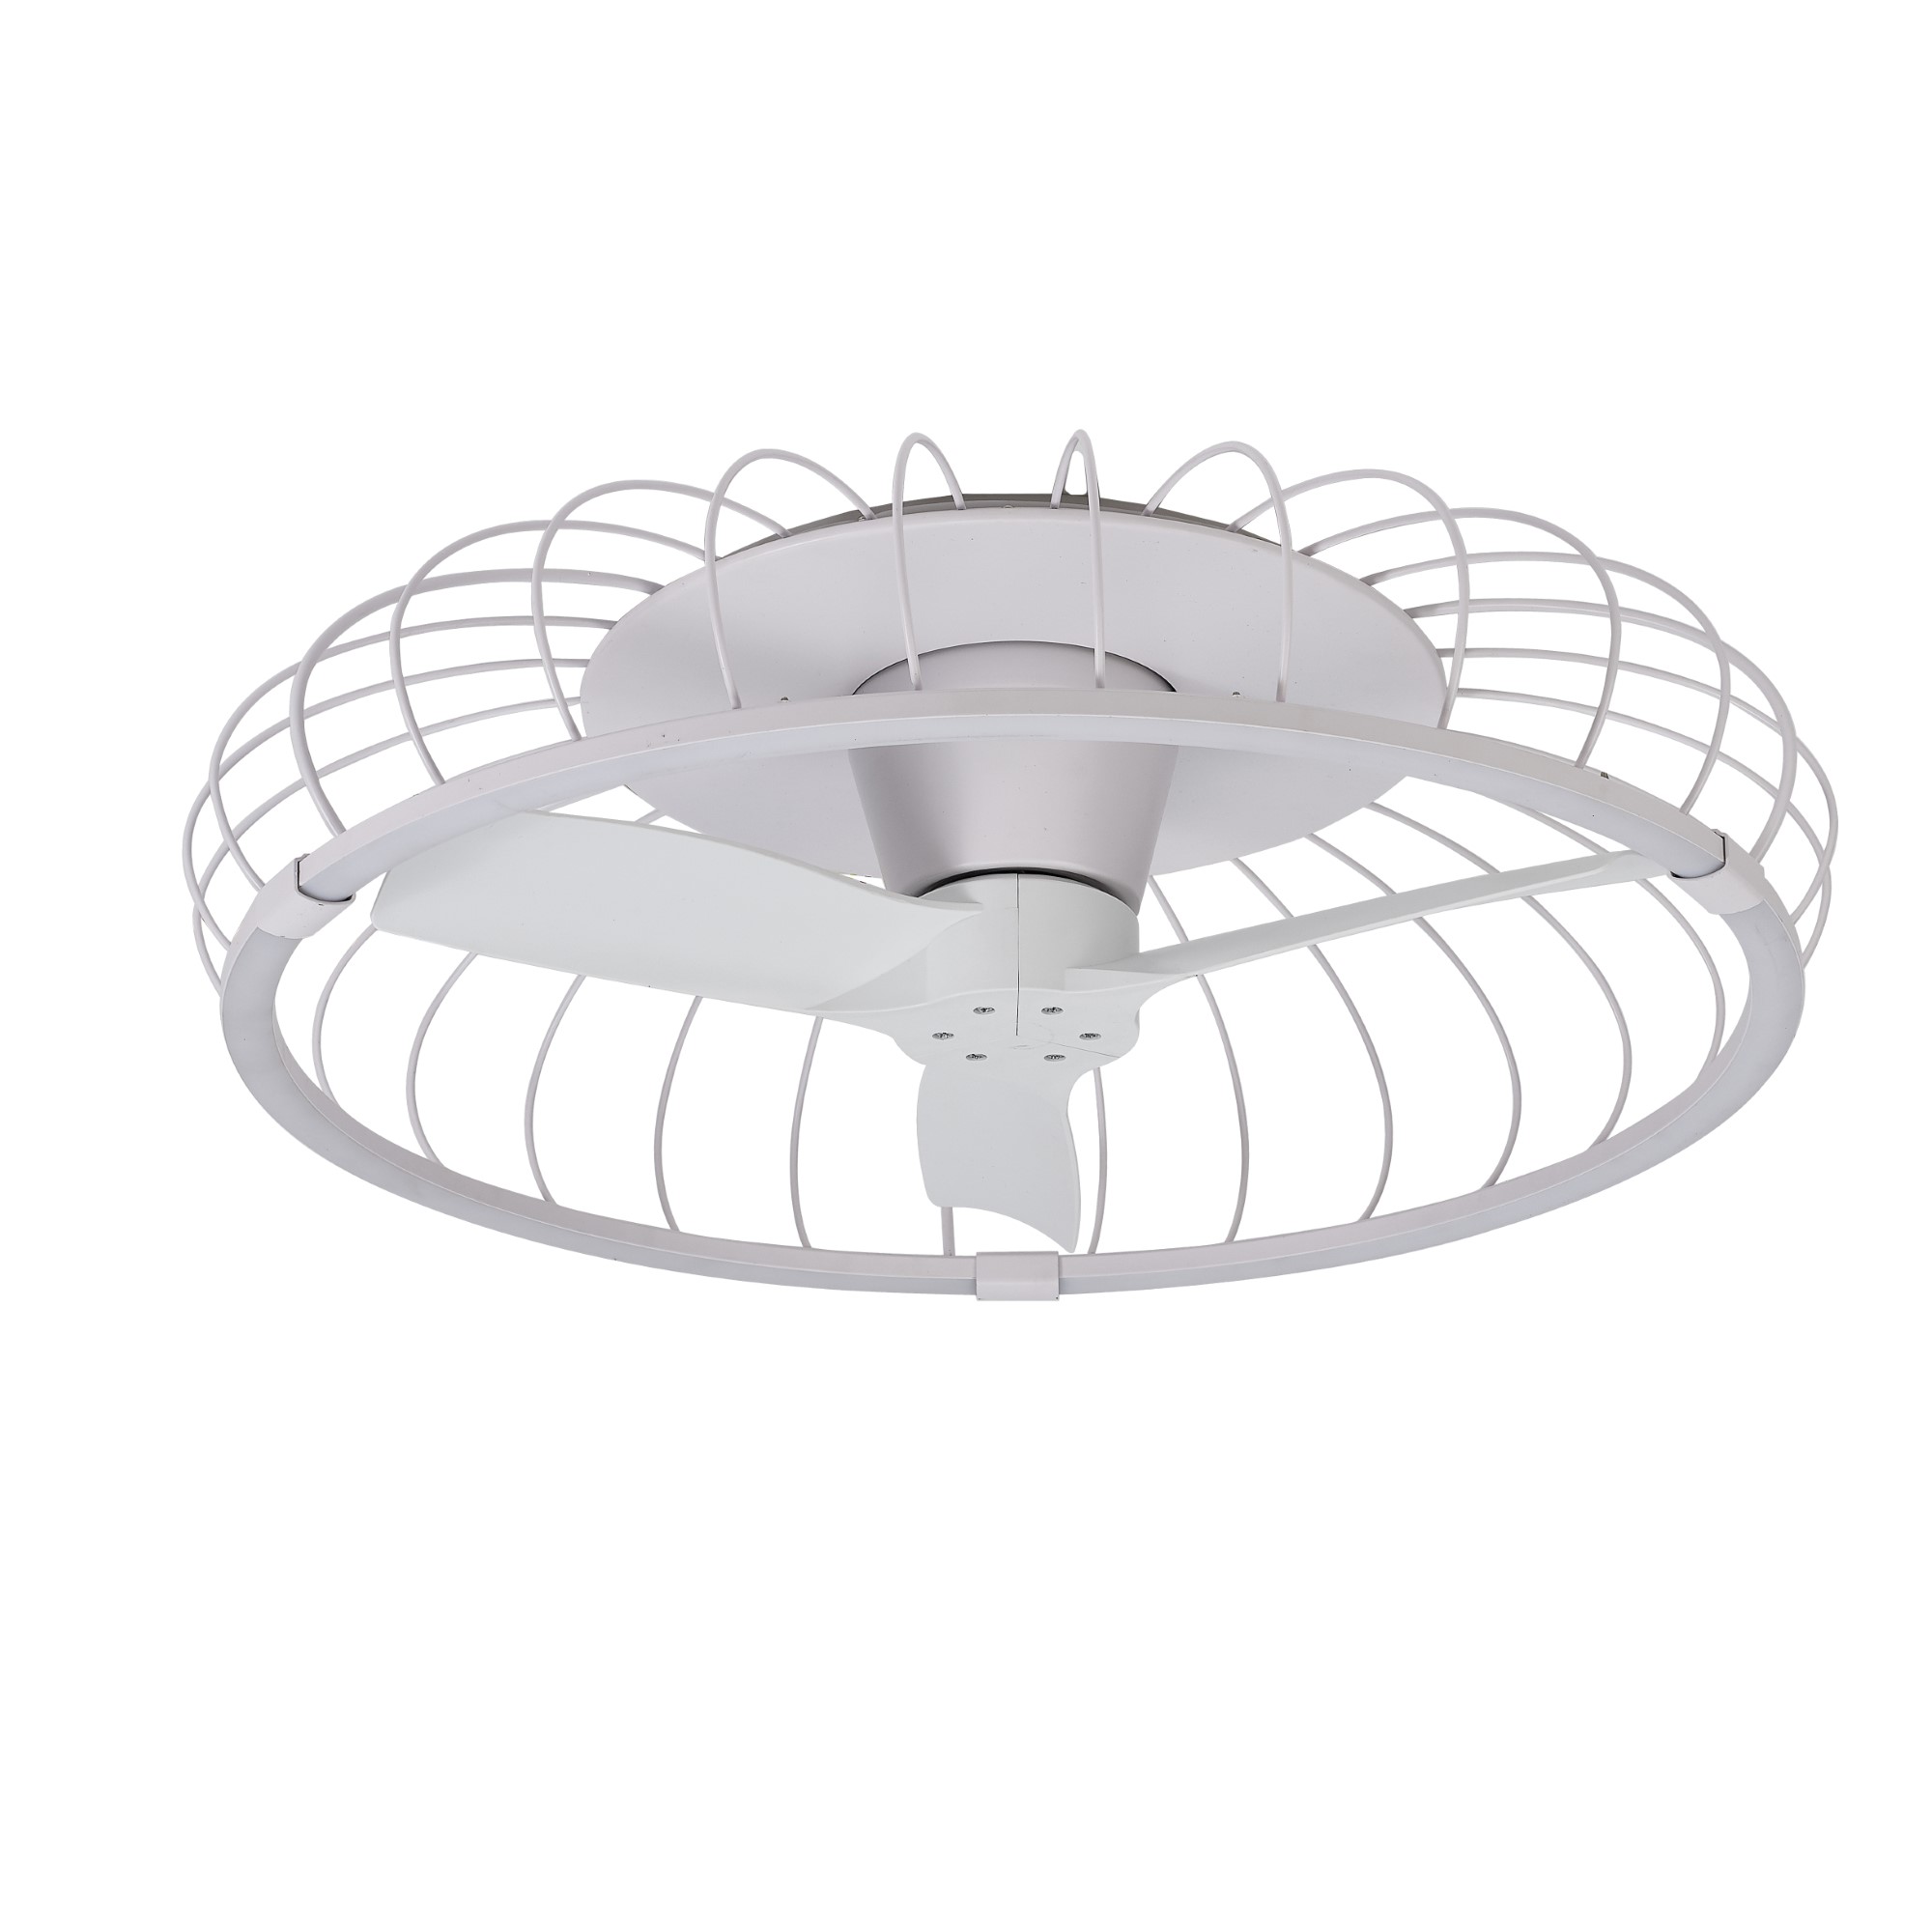 M7807  Nature 75W LED Dimmable Ceiling Light & Fan, Remote / APP / Voice Controlled White